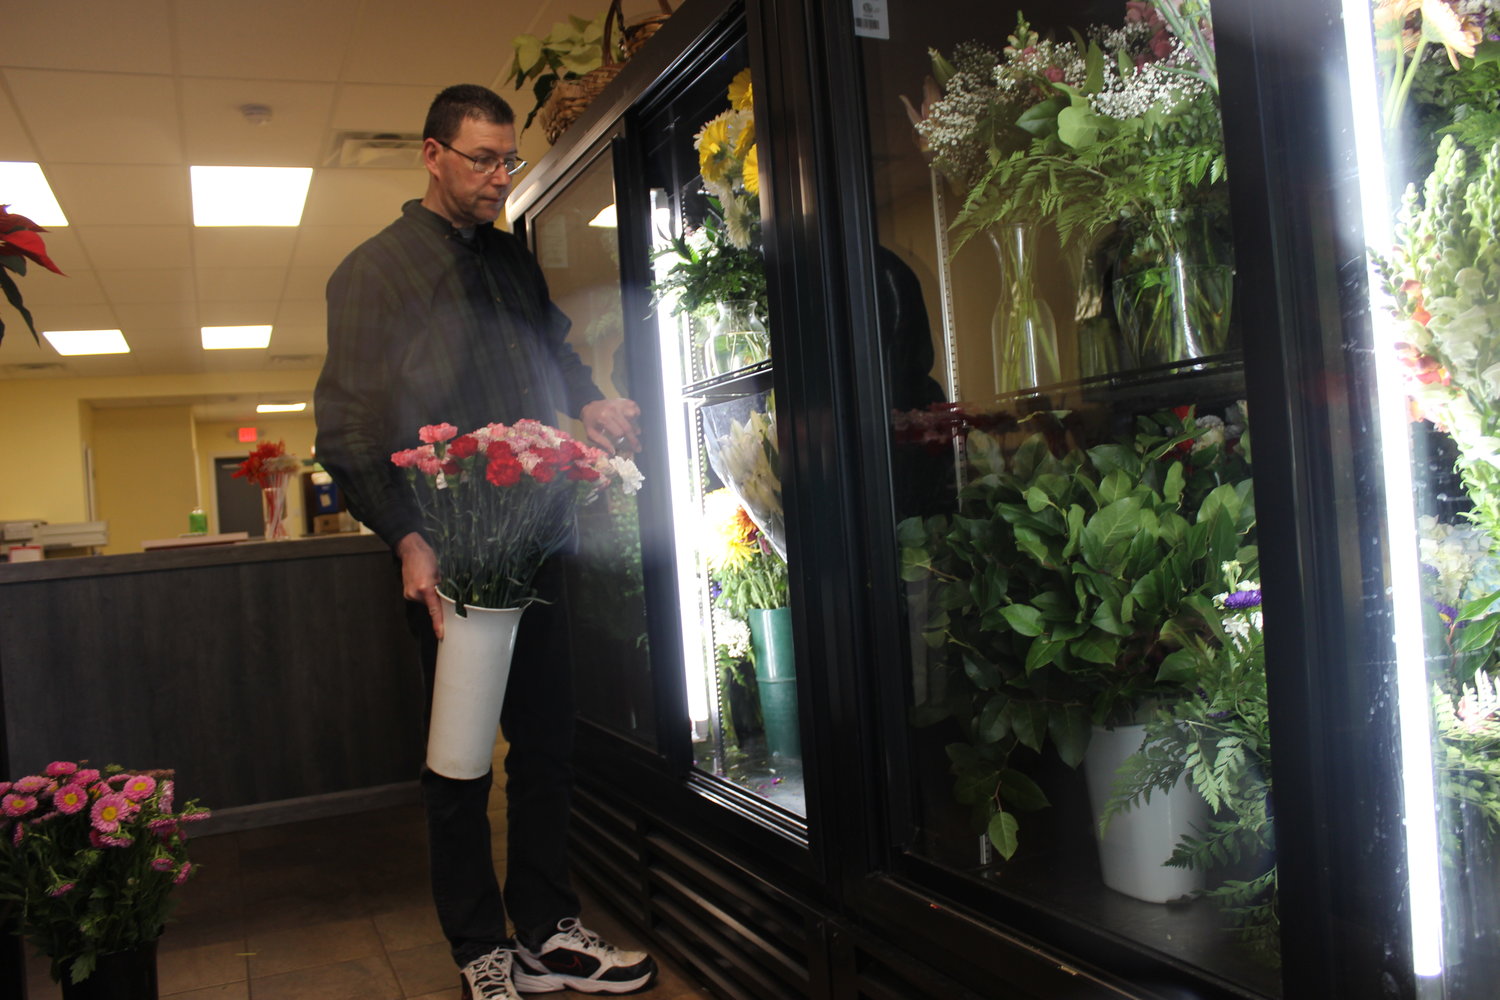 The East Meadow Florist has been in business since 1961, and Chris Hackert became its owner in 1996. Despite downsizing to a one-man operation two years ago, Hackert said he has a dedicated customer base, which shops for poinsettias and seasonal centerpieces for Christmas and Hanukkah.